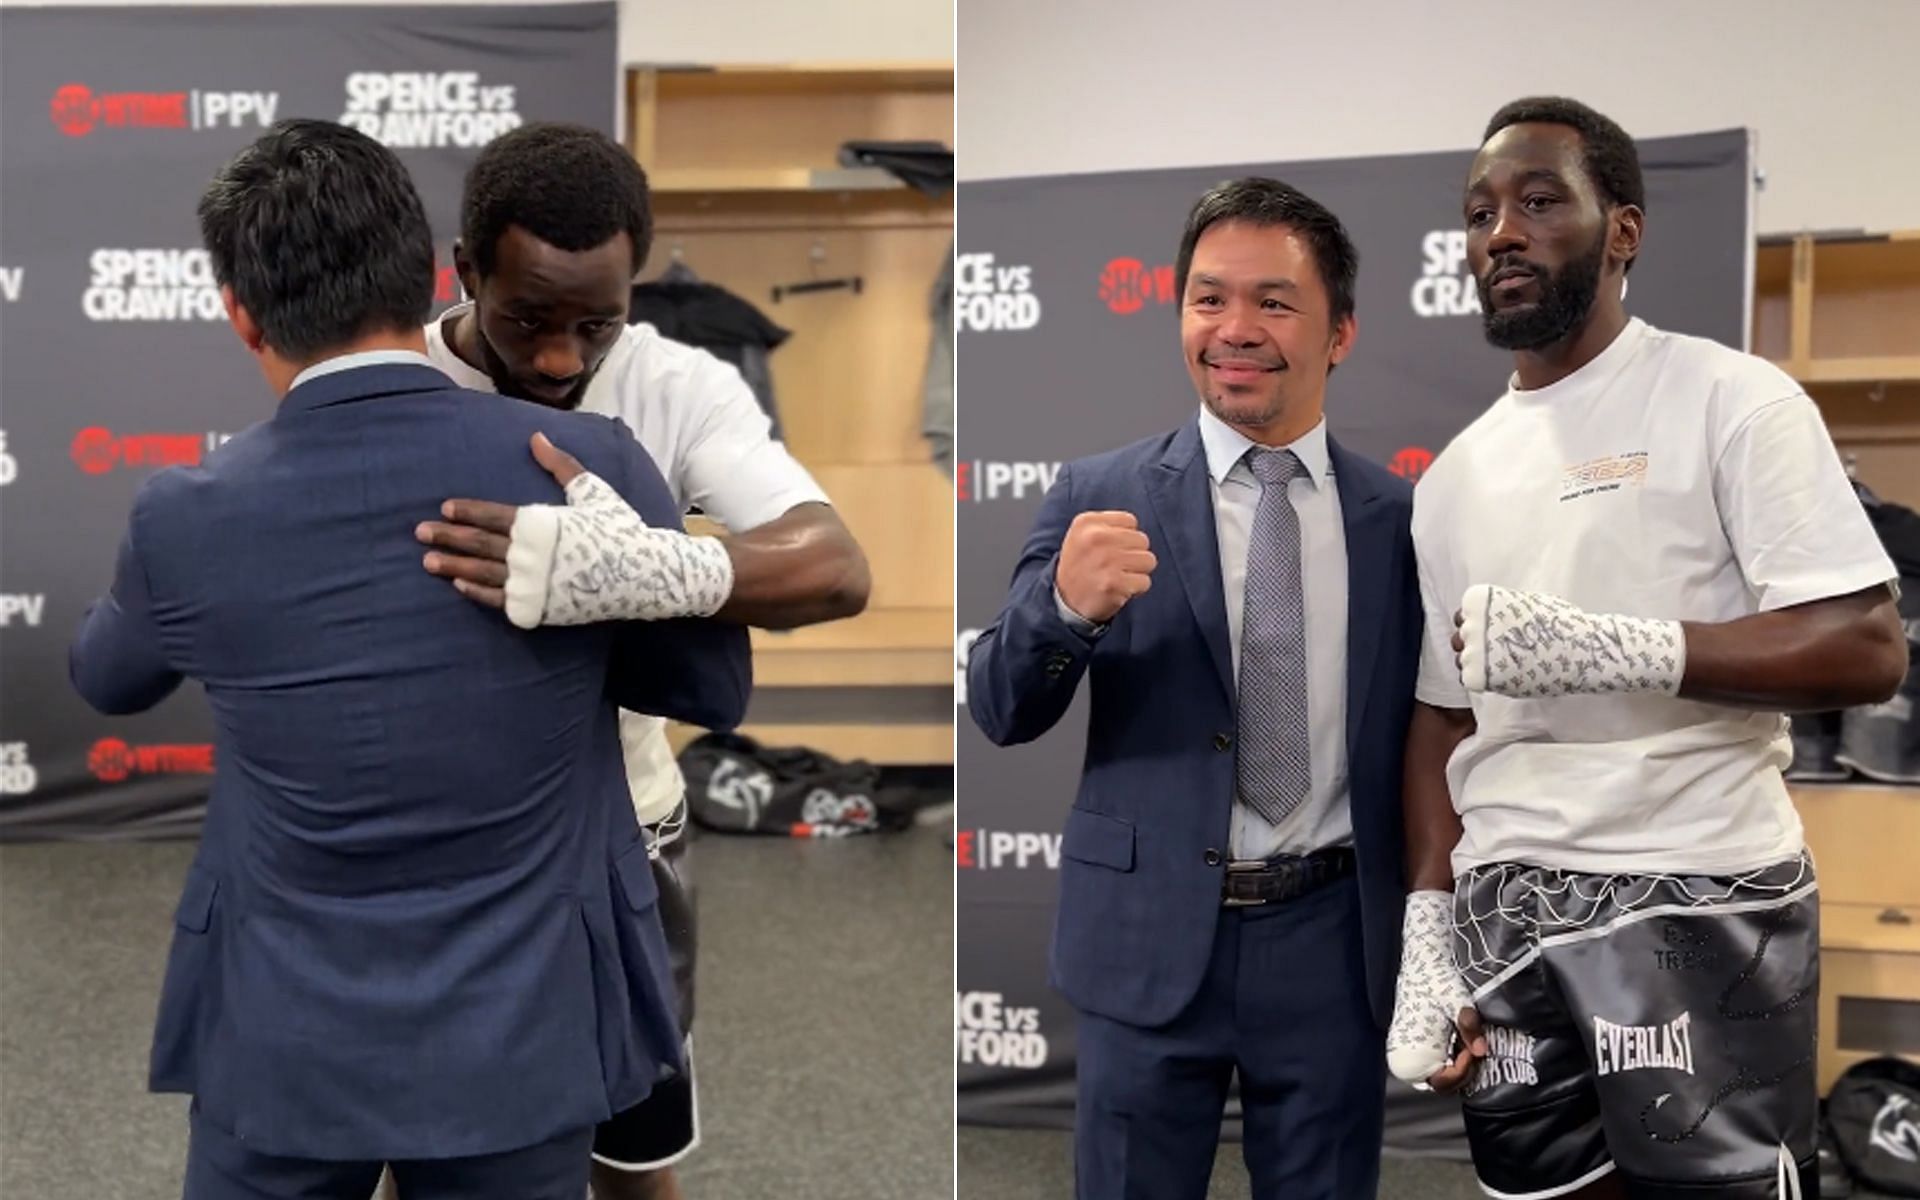 Terence Crawford and Manny Pacquiao [Images via @ShowtimeBoxing Twitter]